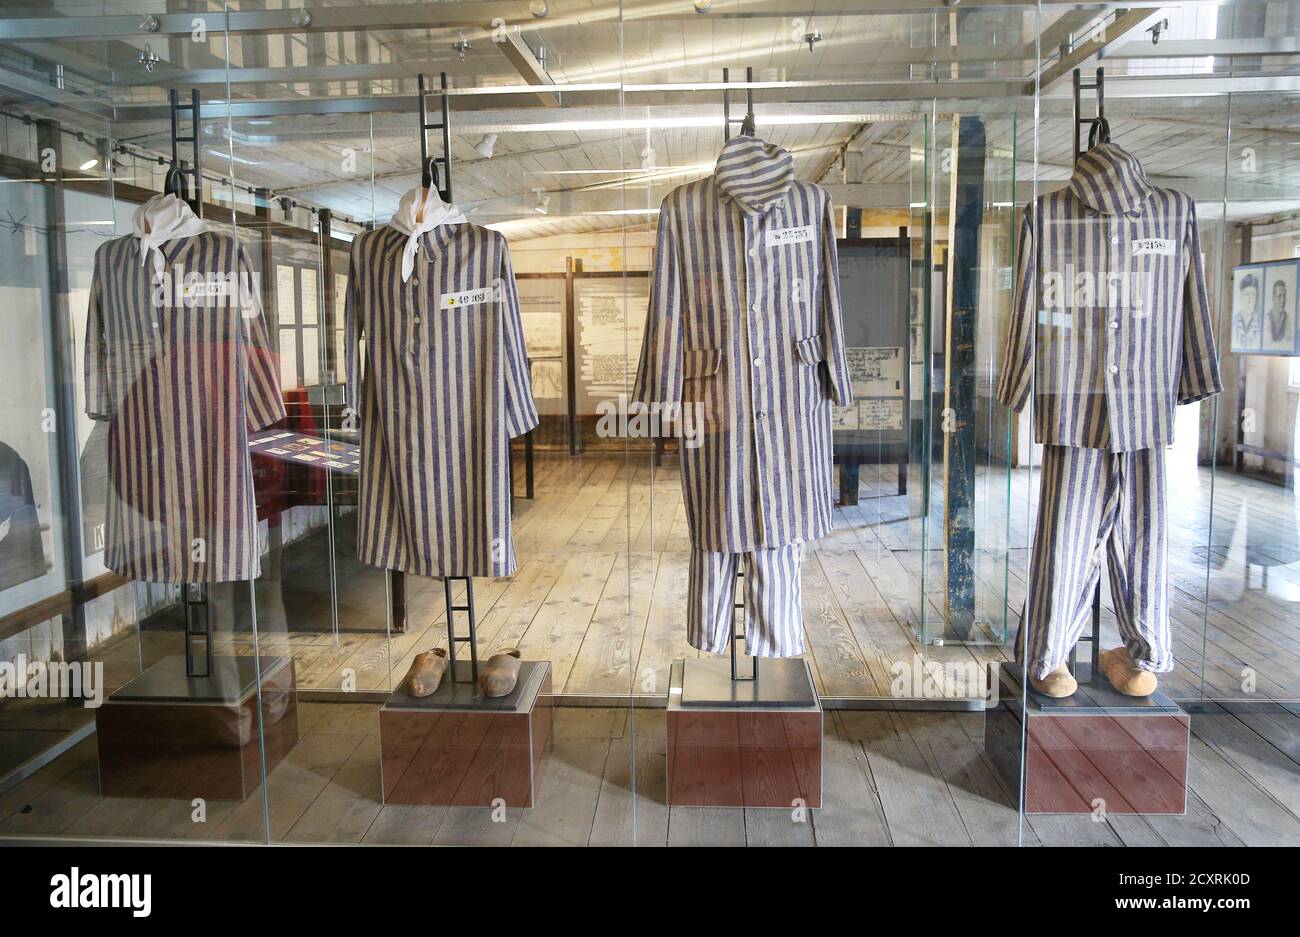 Sztutowo, Poland. 1st Oct, 2020. A view of the former Nazi German Stutthof death camp: museum exhibition, memorabilia of former prisoners, prisoners' clothes, camp uniforms. The Stutthof Museum in Sztutowo. Konzentrationslager Stutthof - former German Nazi concentration camp established in the annexed areas of the Free City of Gdansk, 36 km from Gdansk. It functioned during the Second World War, from September 2, 1939 to May 9, 1945. Credit: Damian Klamka/ZUMA Wire/Alamy Live News Stock Photo